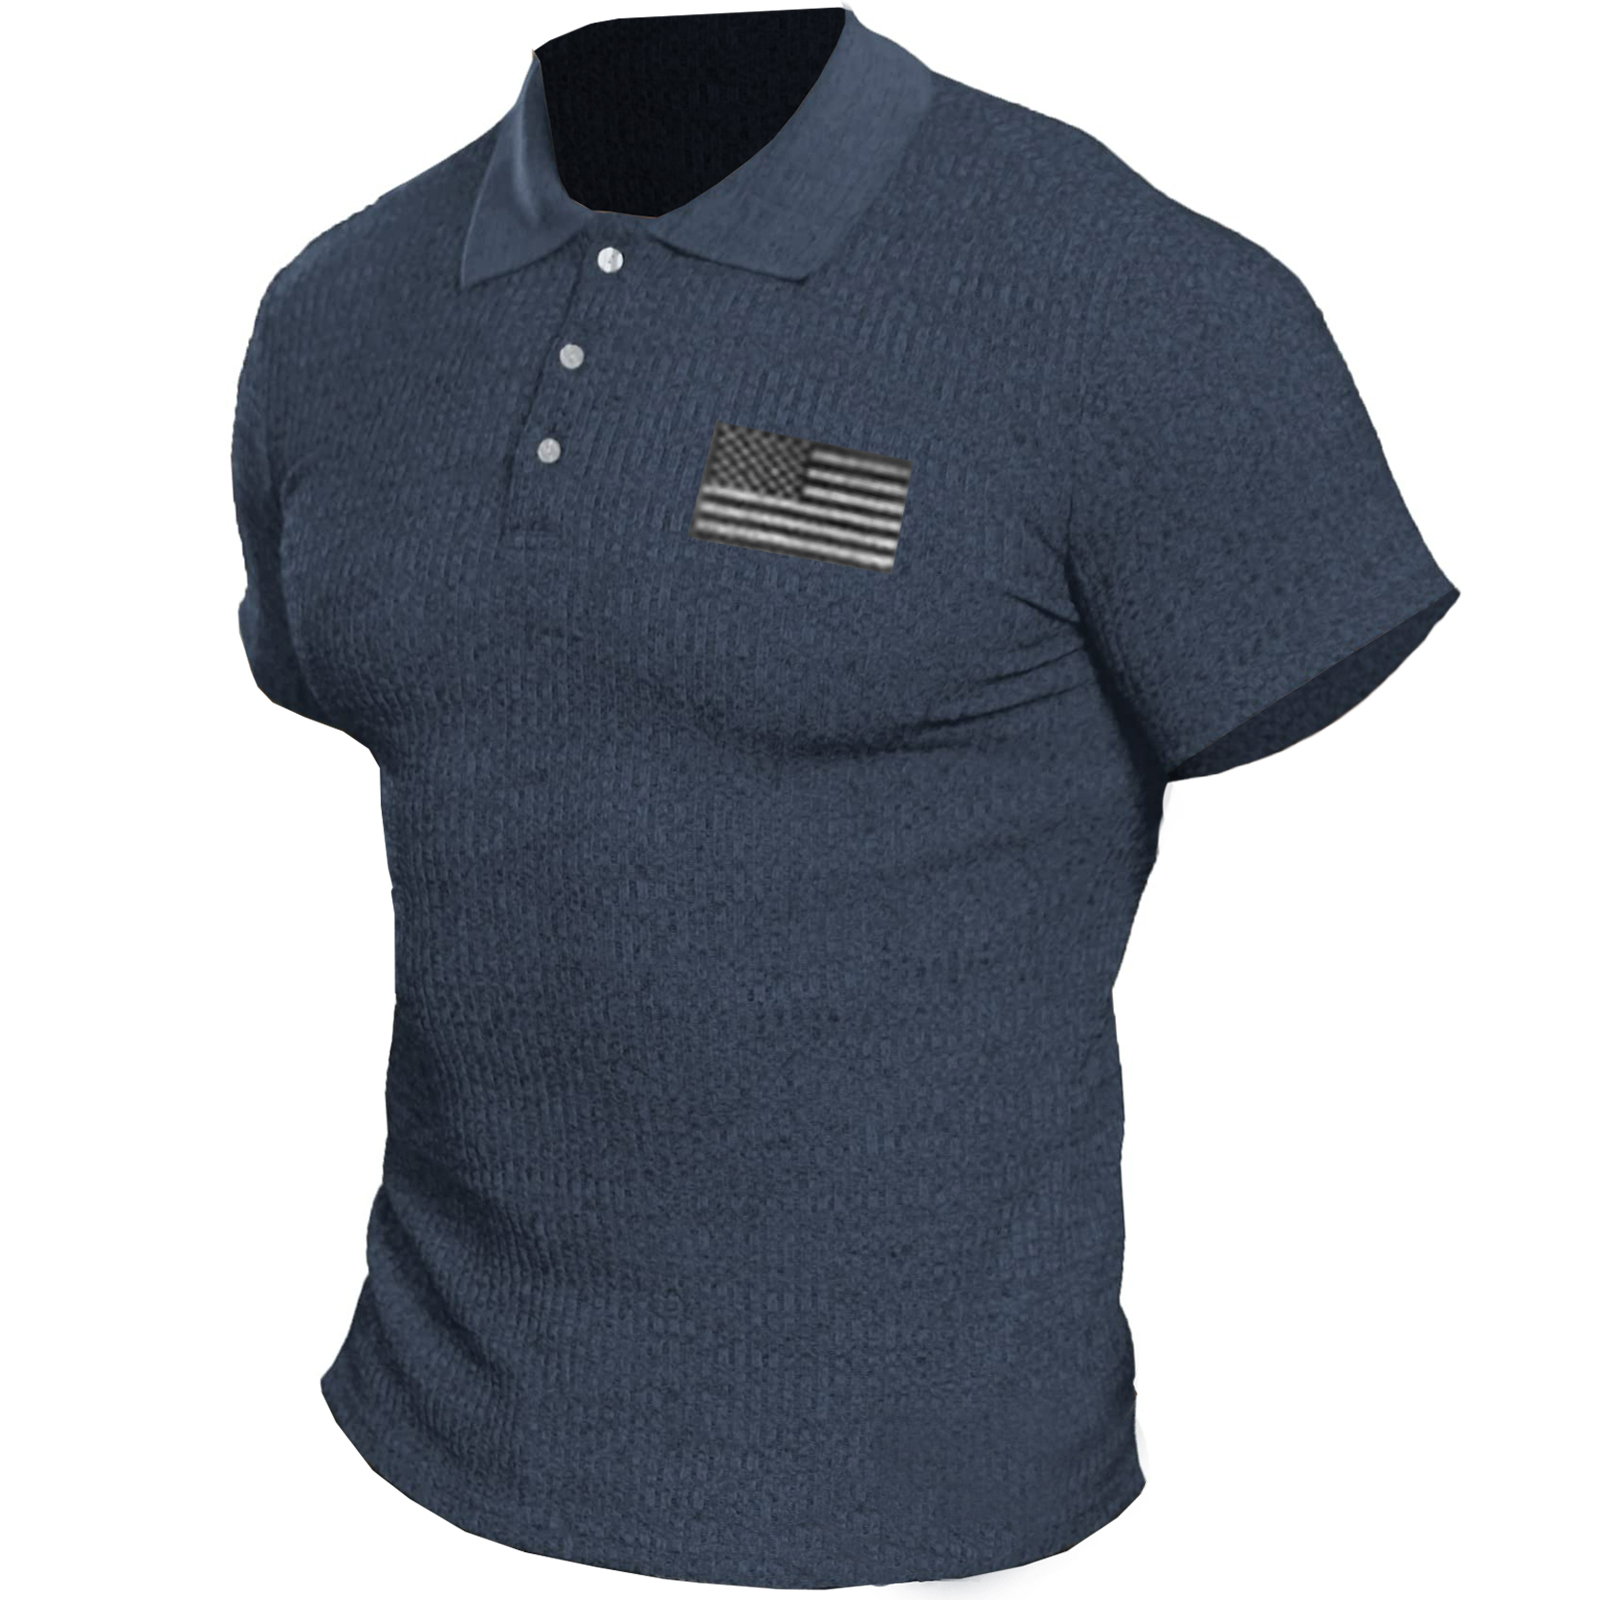 Men's Solid Knit Outdoor Chic Tactical Polo T-shirt